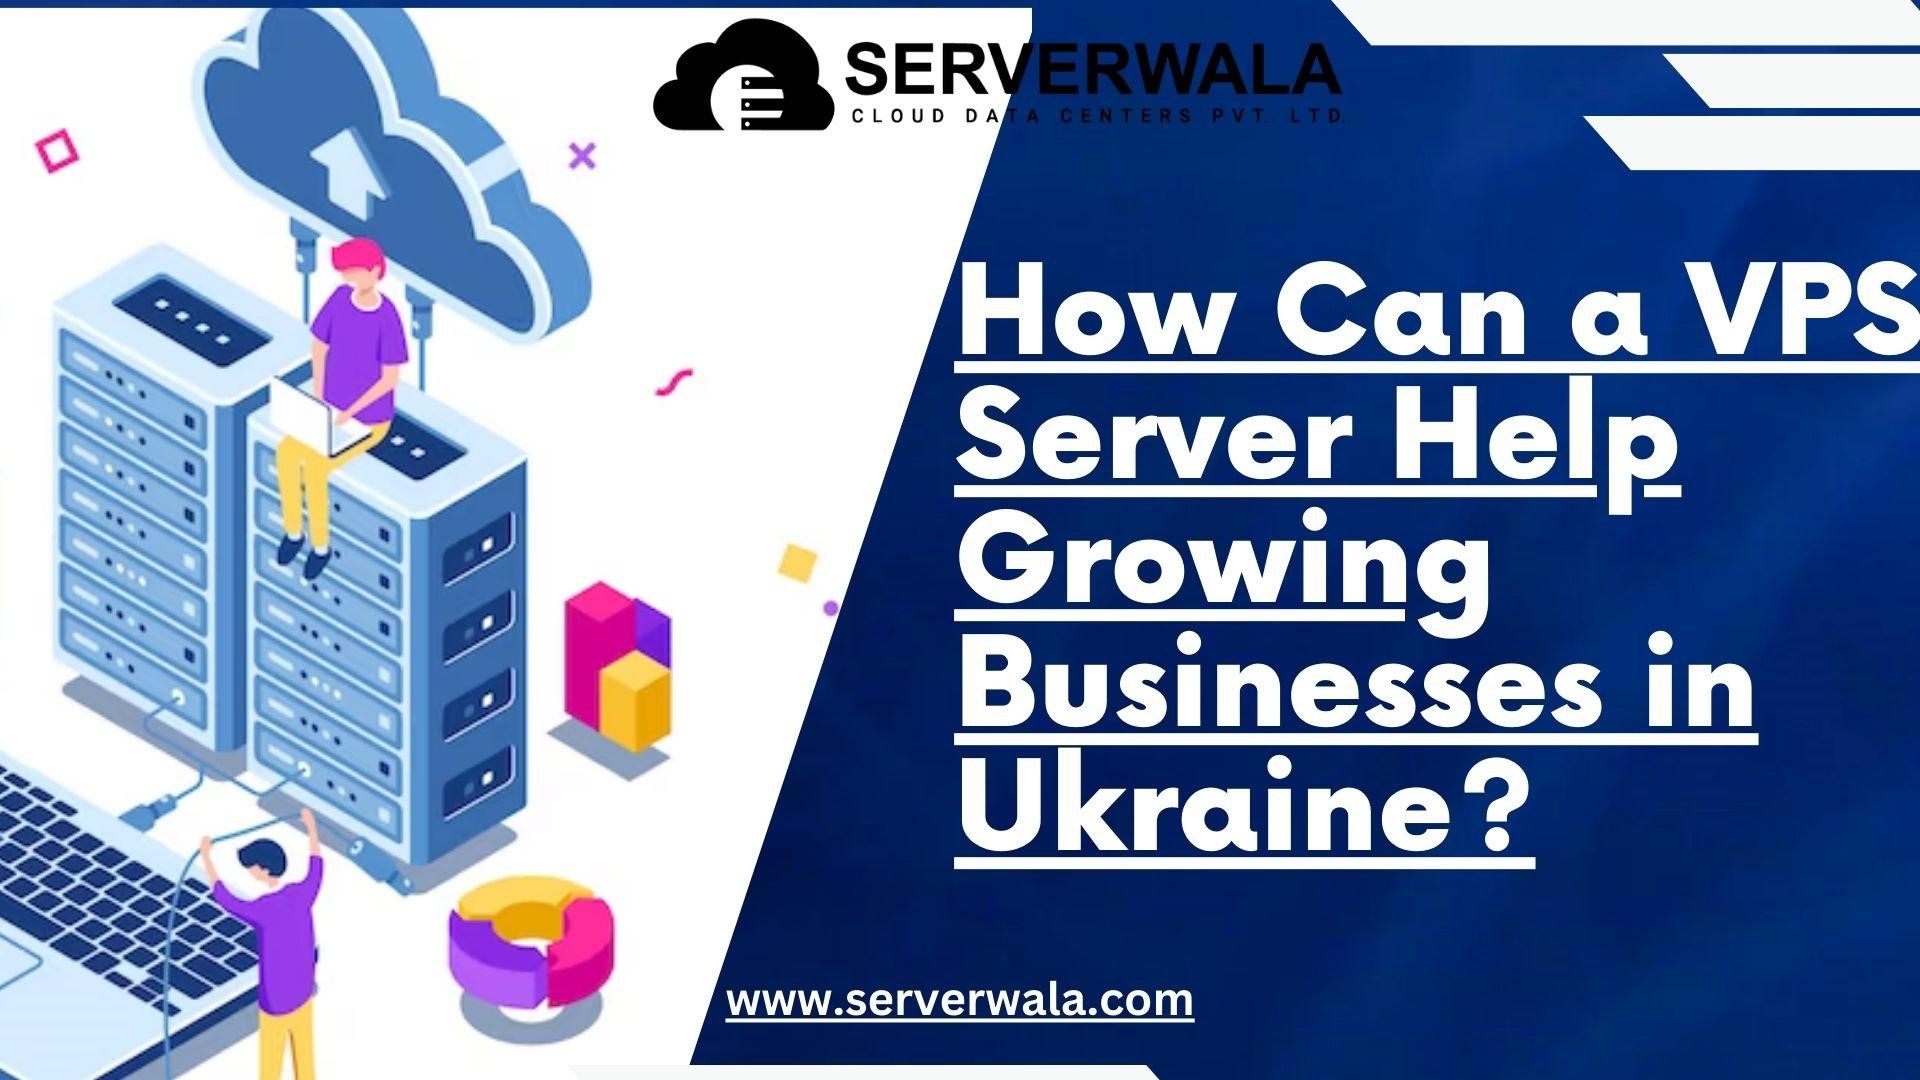 How Can a VPS Server Help Growing Businesses in Ukraine?